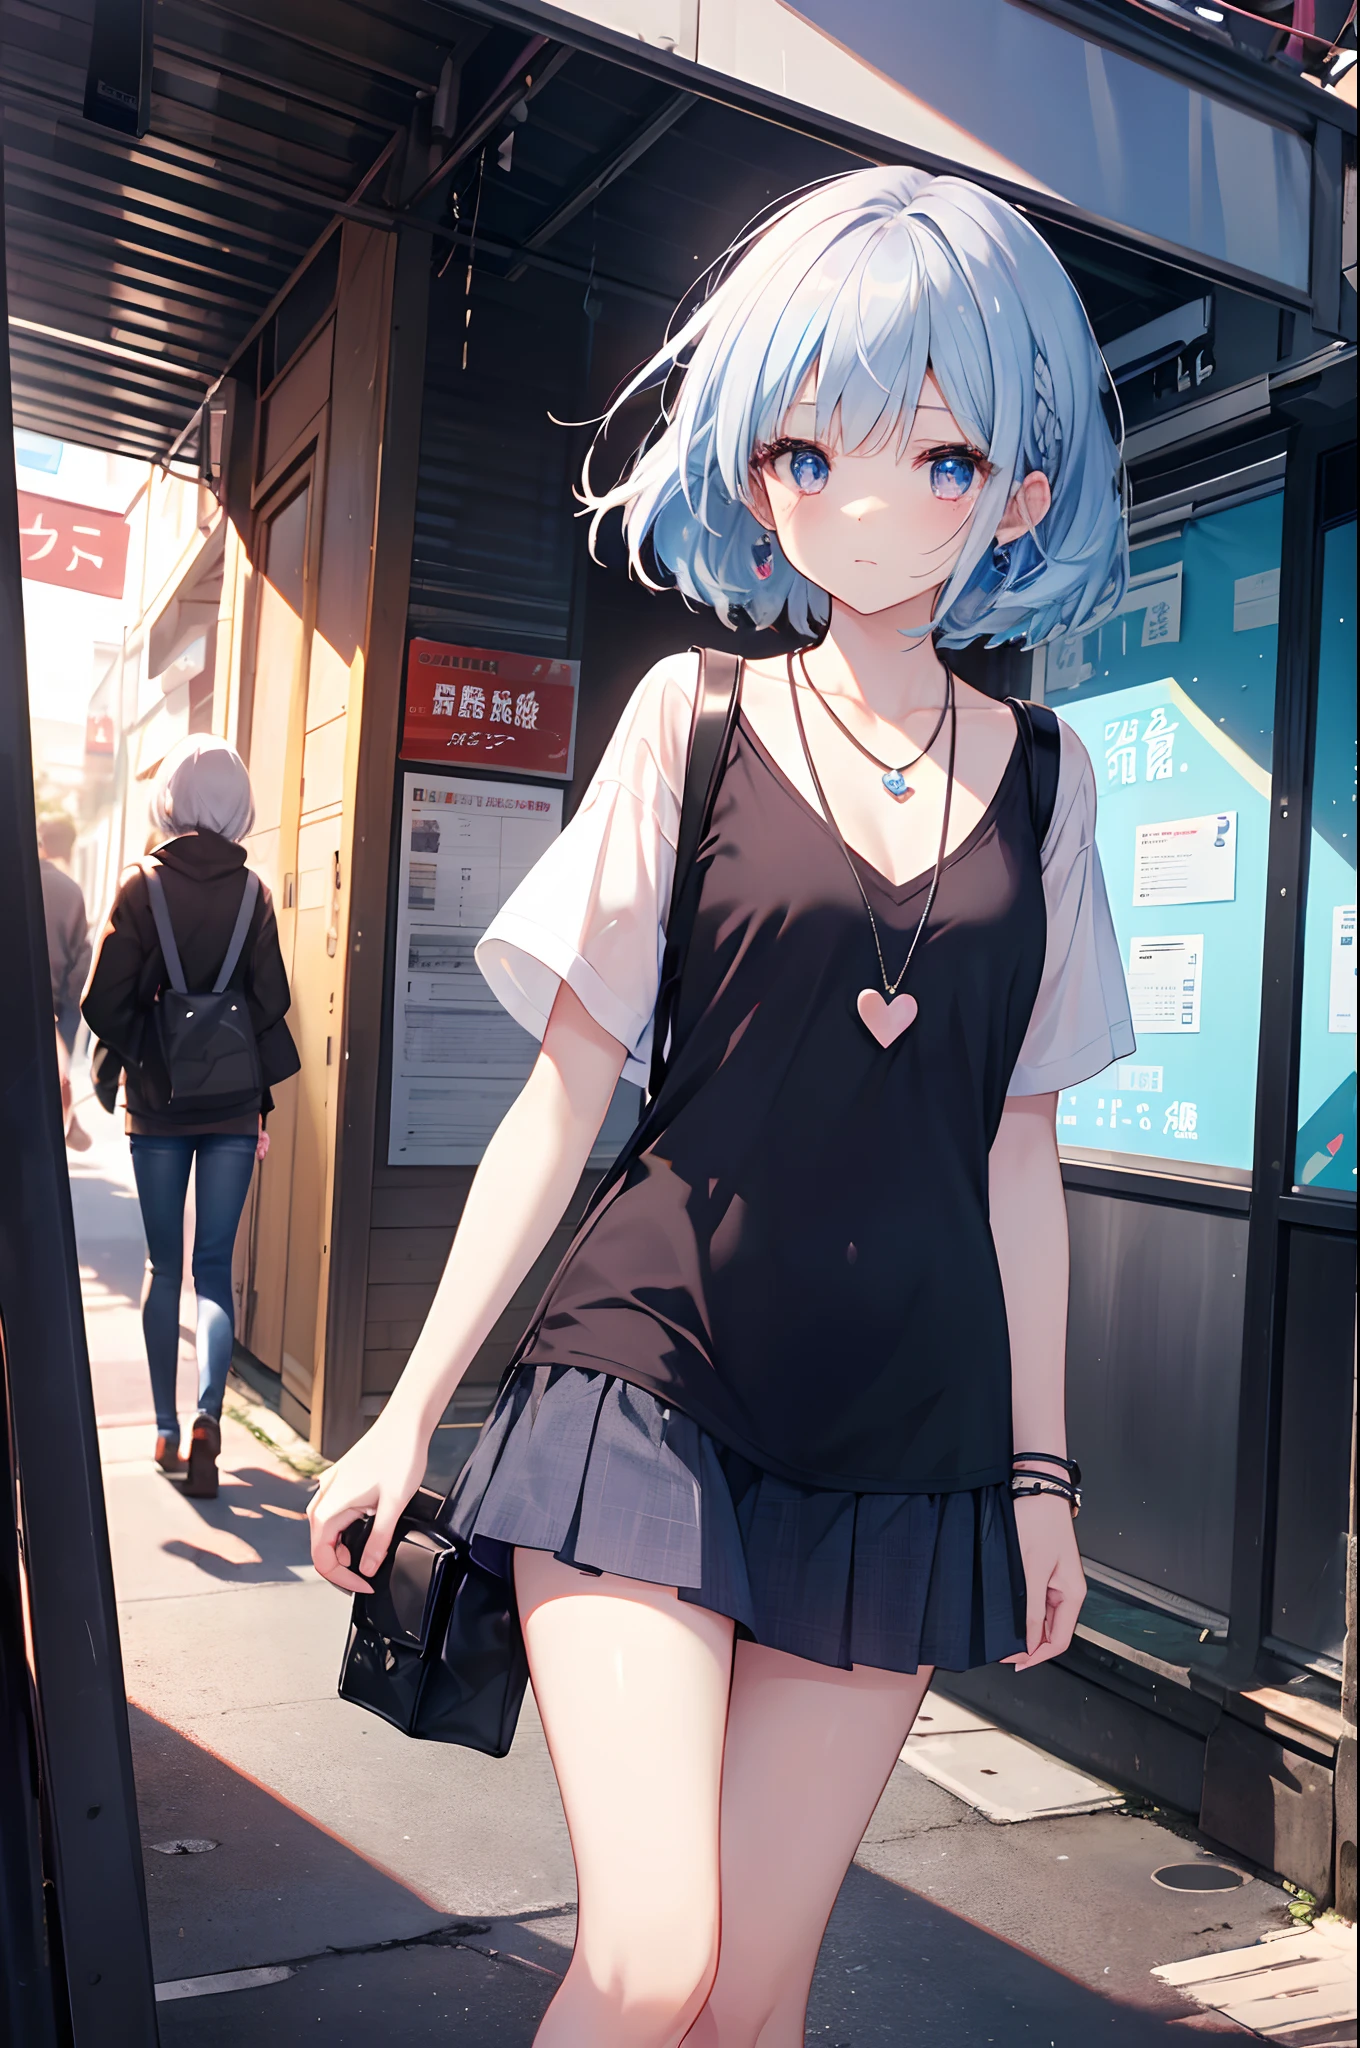 (masutepiece, Best Quality:1.2), 1girl in, Solo, Cute, kawaii, digitalart、Aimei、(long, Beautiful, Blue hair.Flowing in the wind)、tshirts、a miniskirt、Urban hustle and bustle、Meeting for a date,during daytime, Embarrassed expression, Silver hair(Short)、glistning skin、Small-faced beauty, Heart-shaped necklace,Low Angle Lens、perfect-composition、Perfect light and shadow delicacy、in 8K